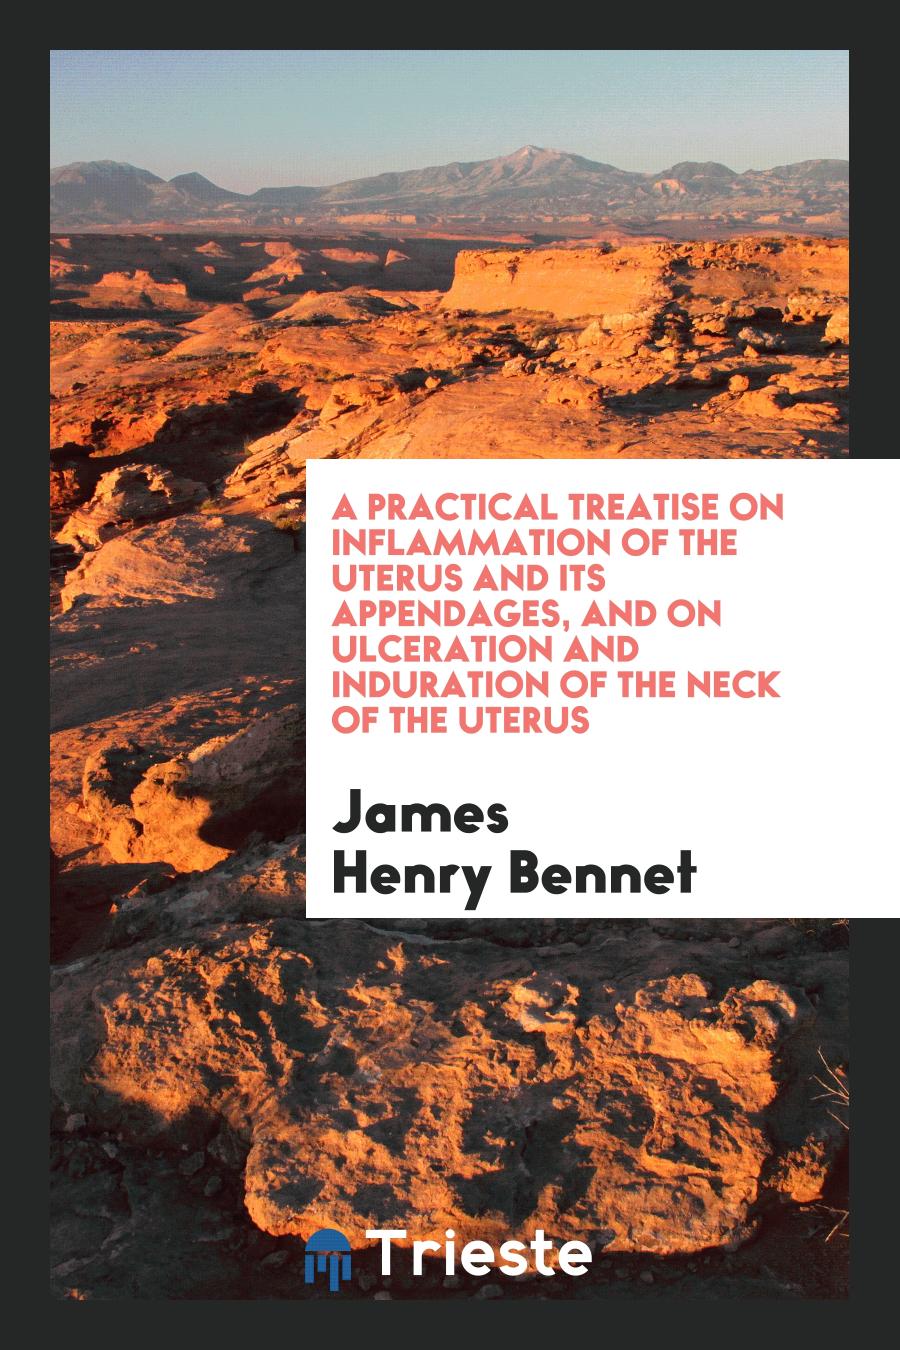 A Practical Treatise on Inflammation of the Uterus and Its Appendages, and on Ulceration and Induration of the Neck of the Uterus